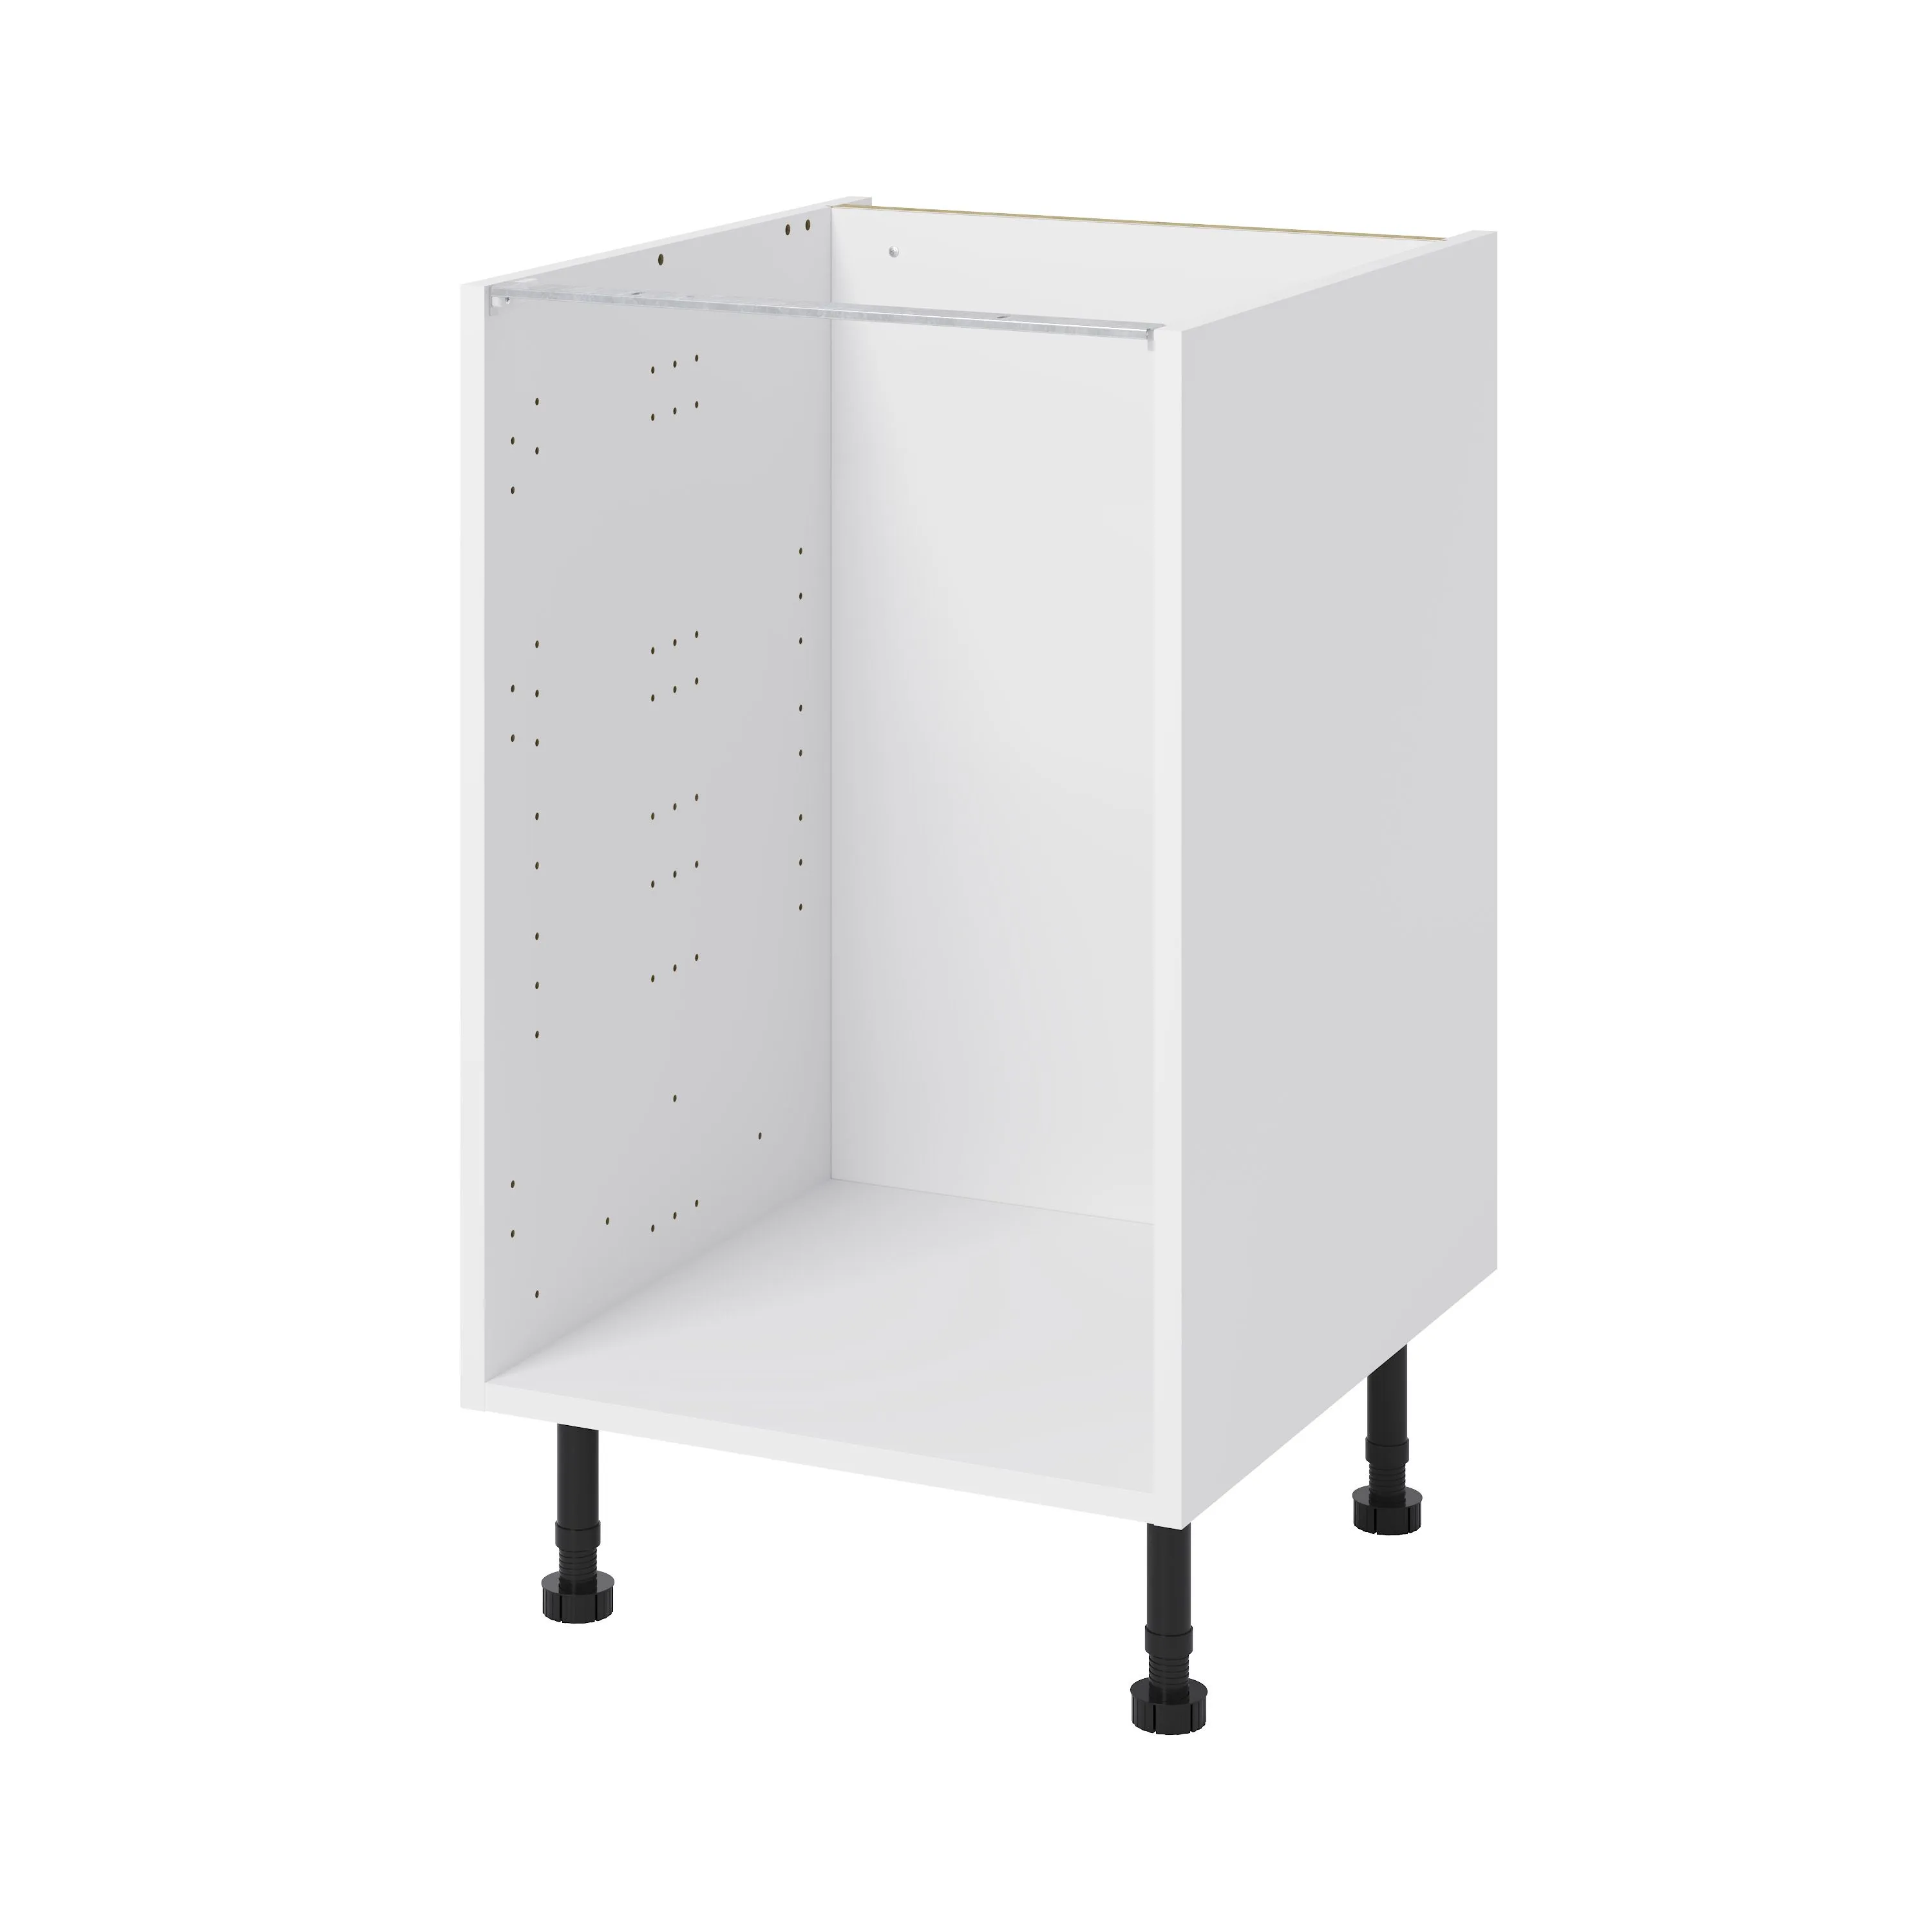 GoodHome Caraway White Base cabinet, (W)500mm